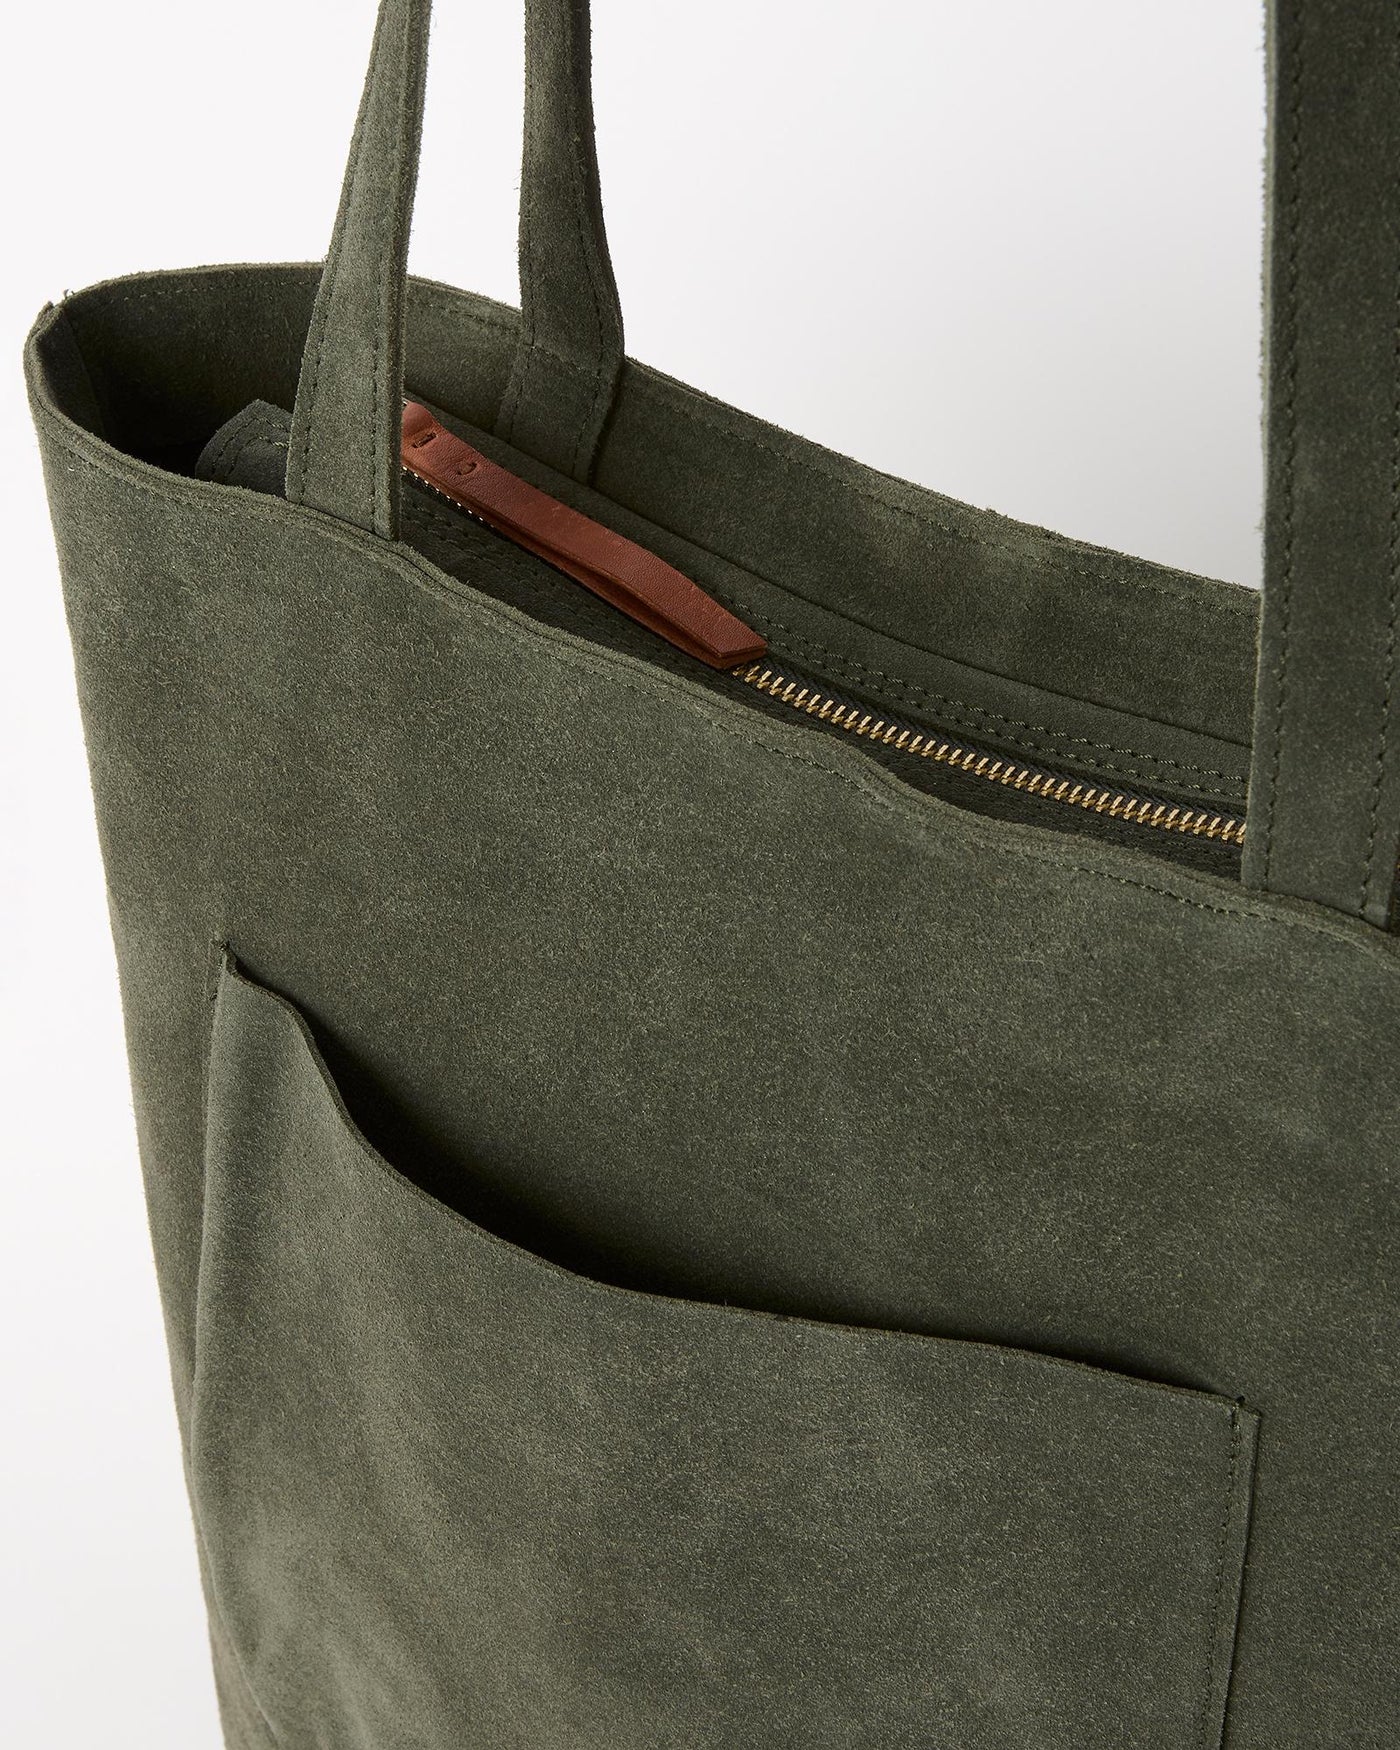 Suede Everyday Tote - Olive